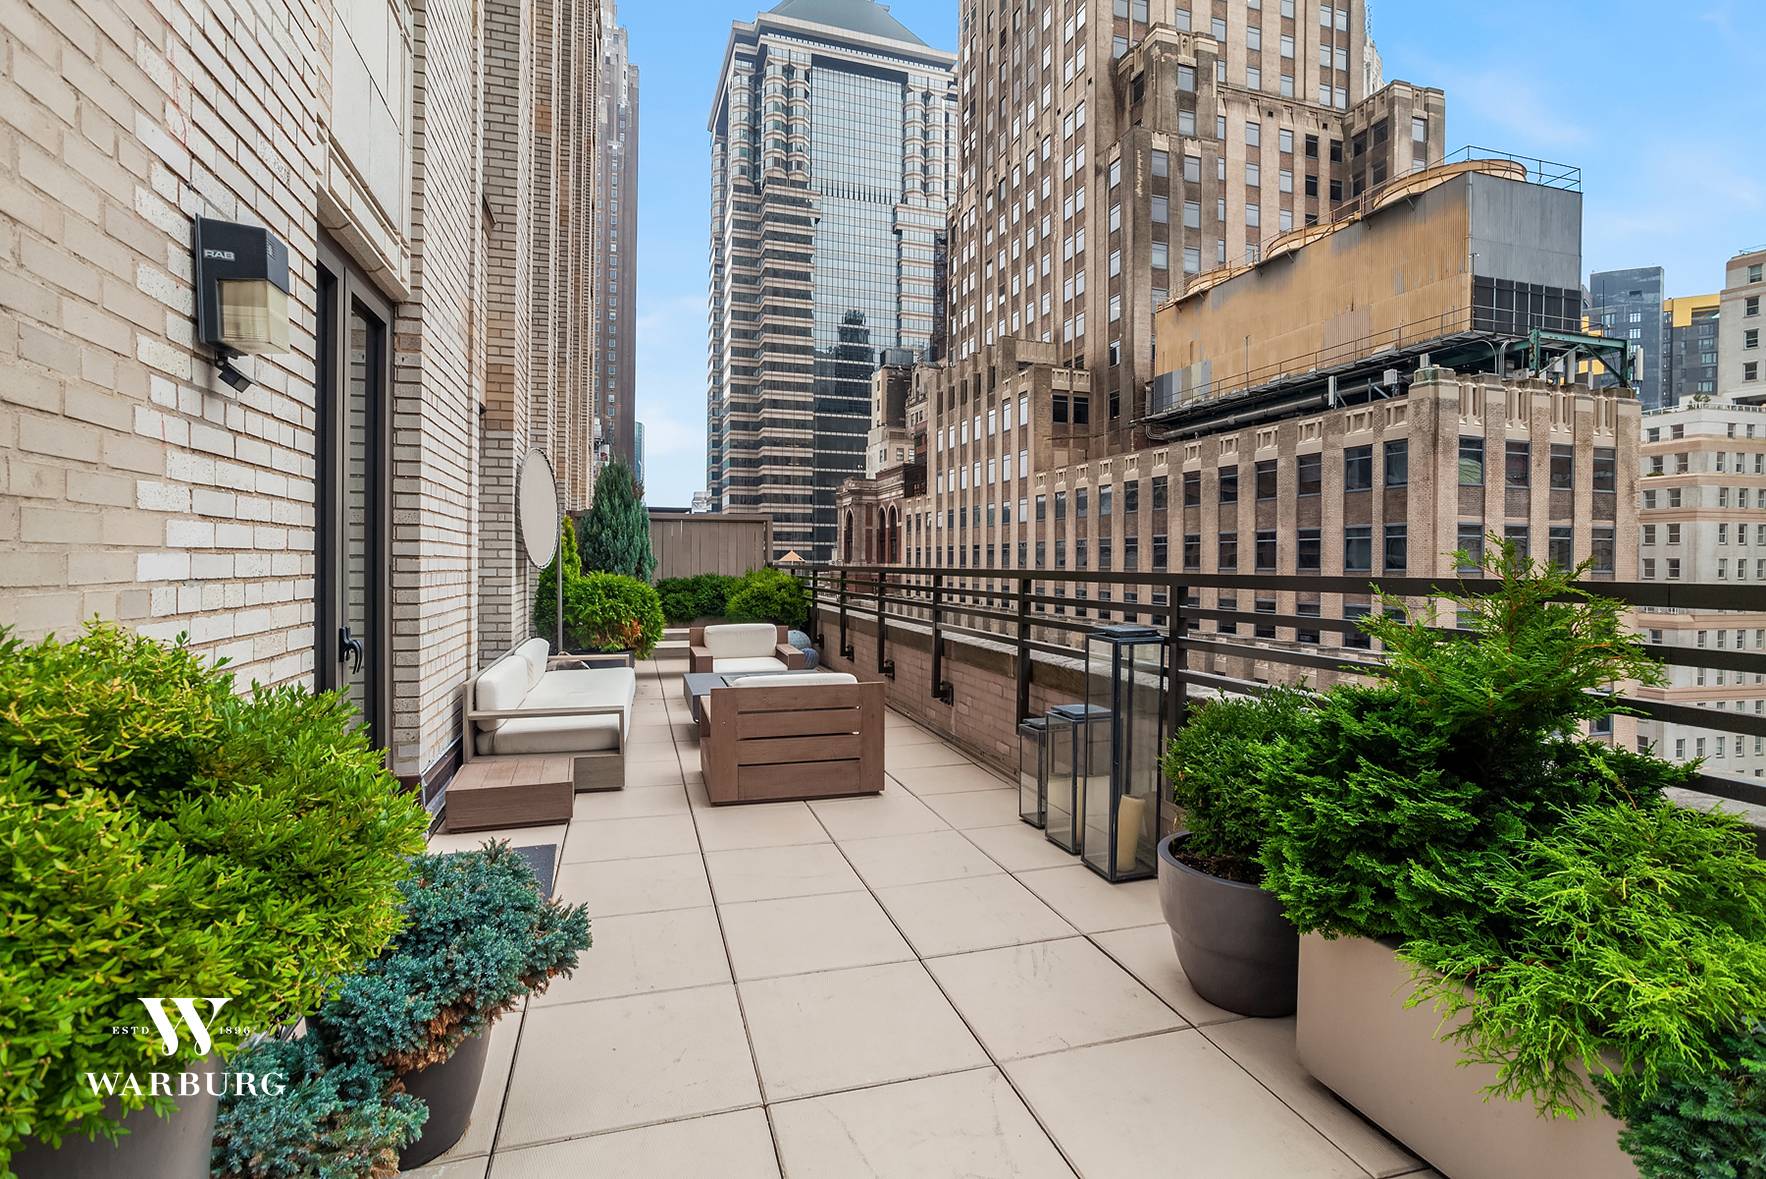 PH 2501 is a rare and distinctive oasis featuring a massive south and west facing L shaped terrace that boasts 87' feet of landscaped outdoor space complete with lighting and ...